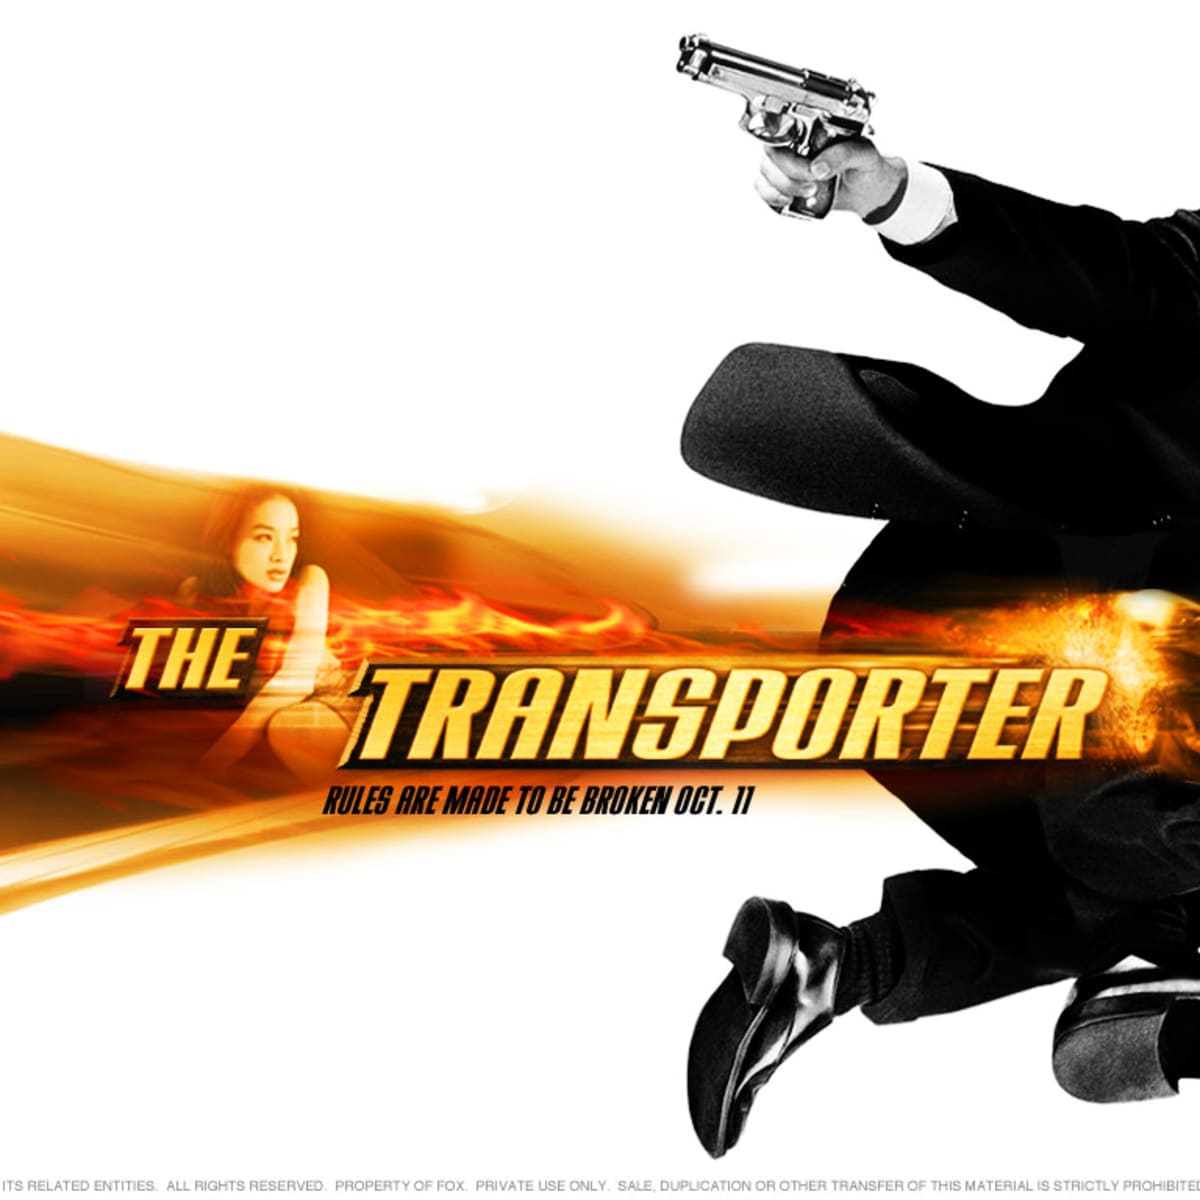 should i watch the transporter